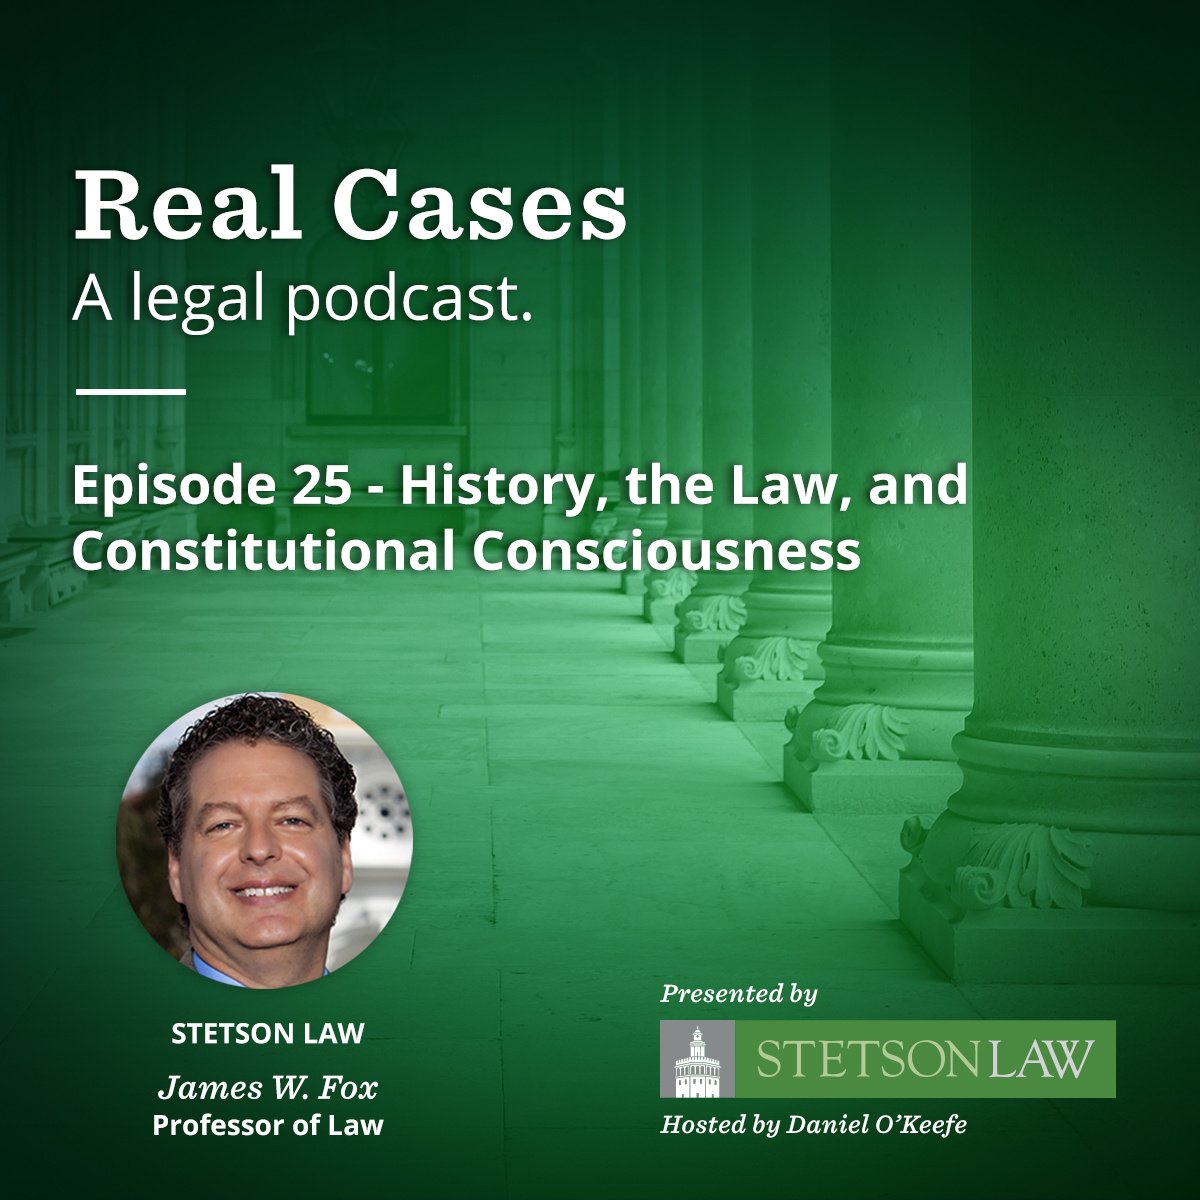 Real Cases - a legal podcast. Episode 25: History, the Law, and Constitutional Consciousness - James W. Fox